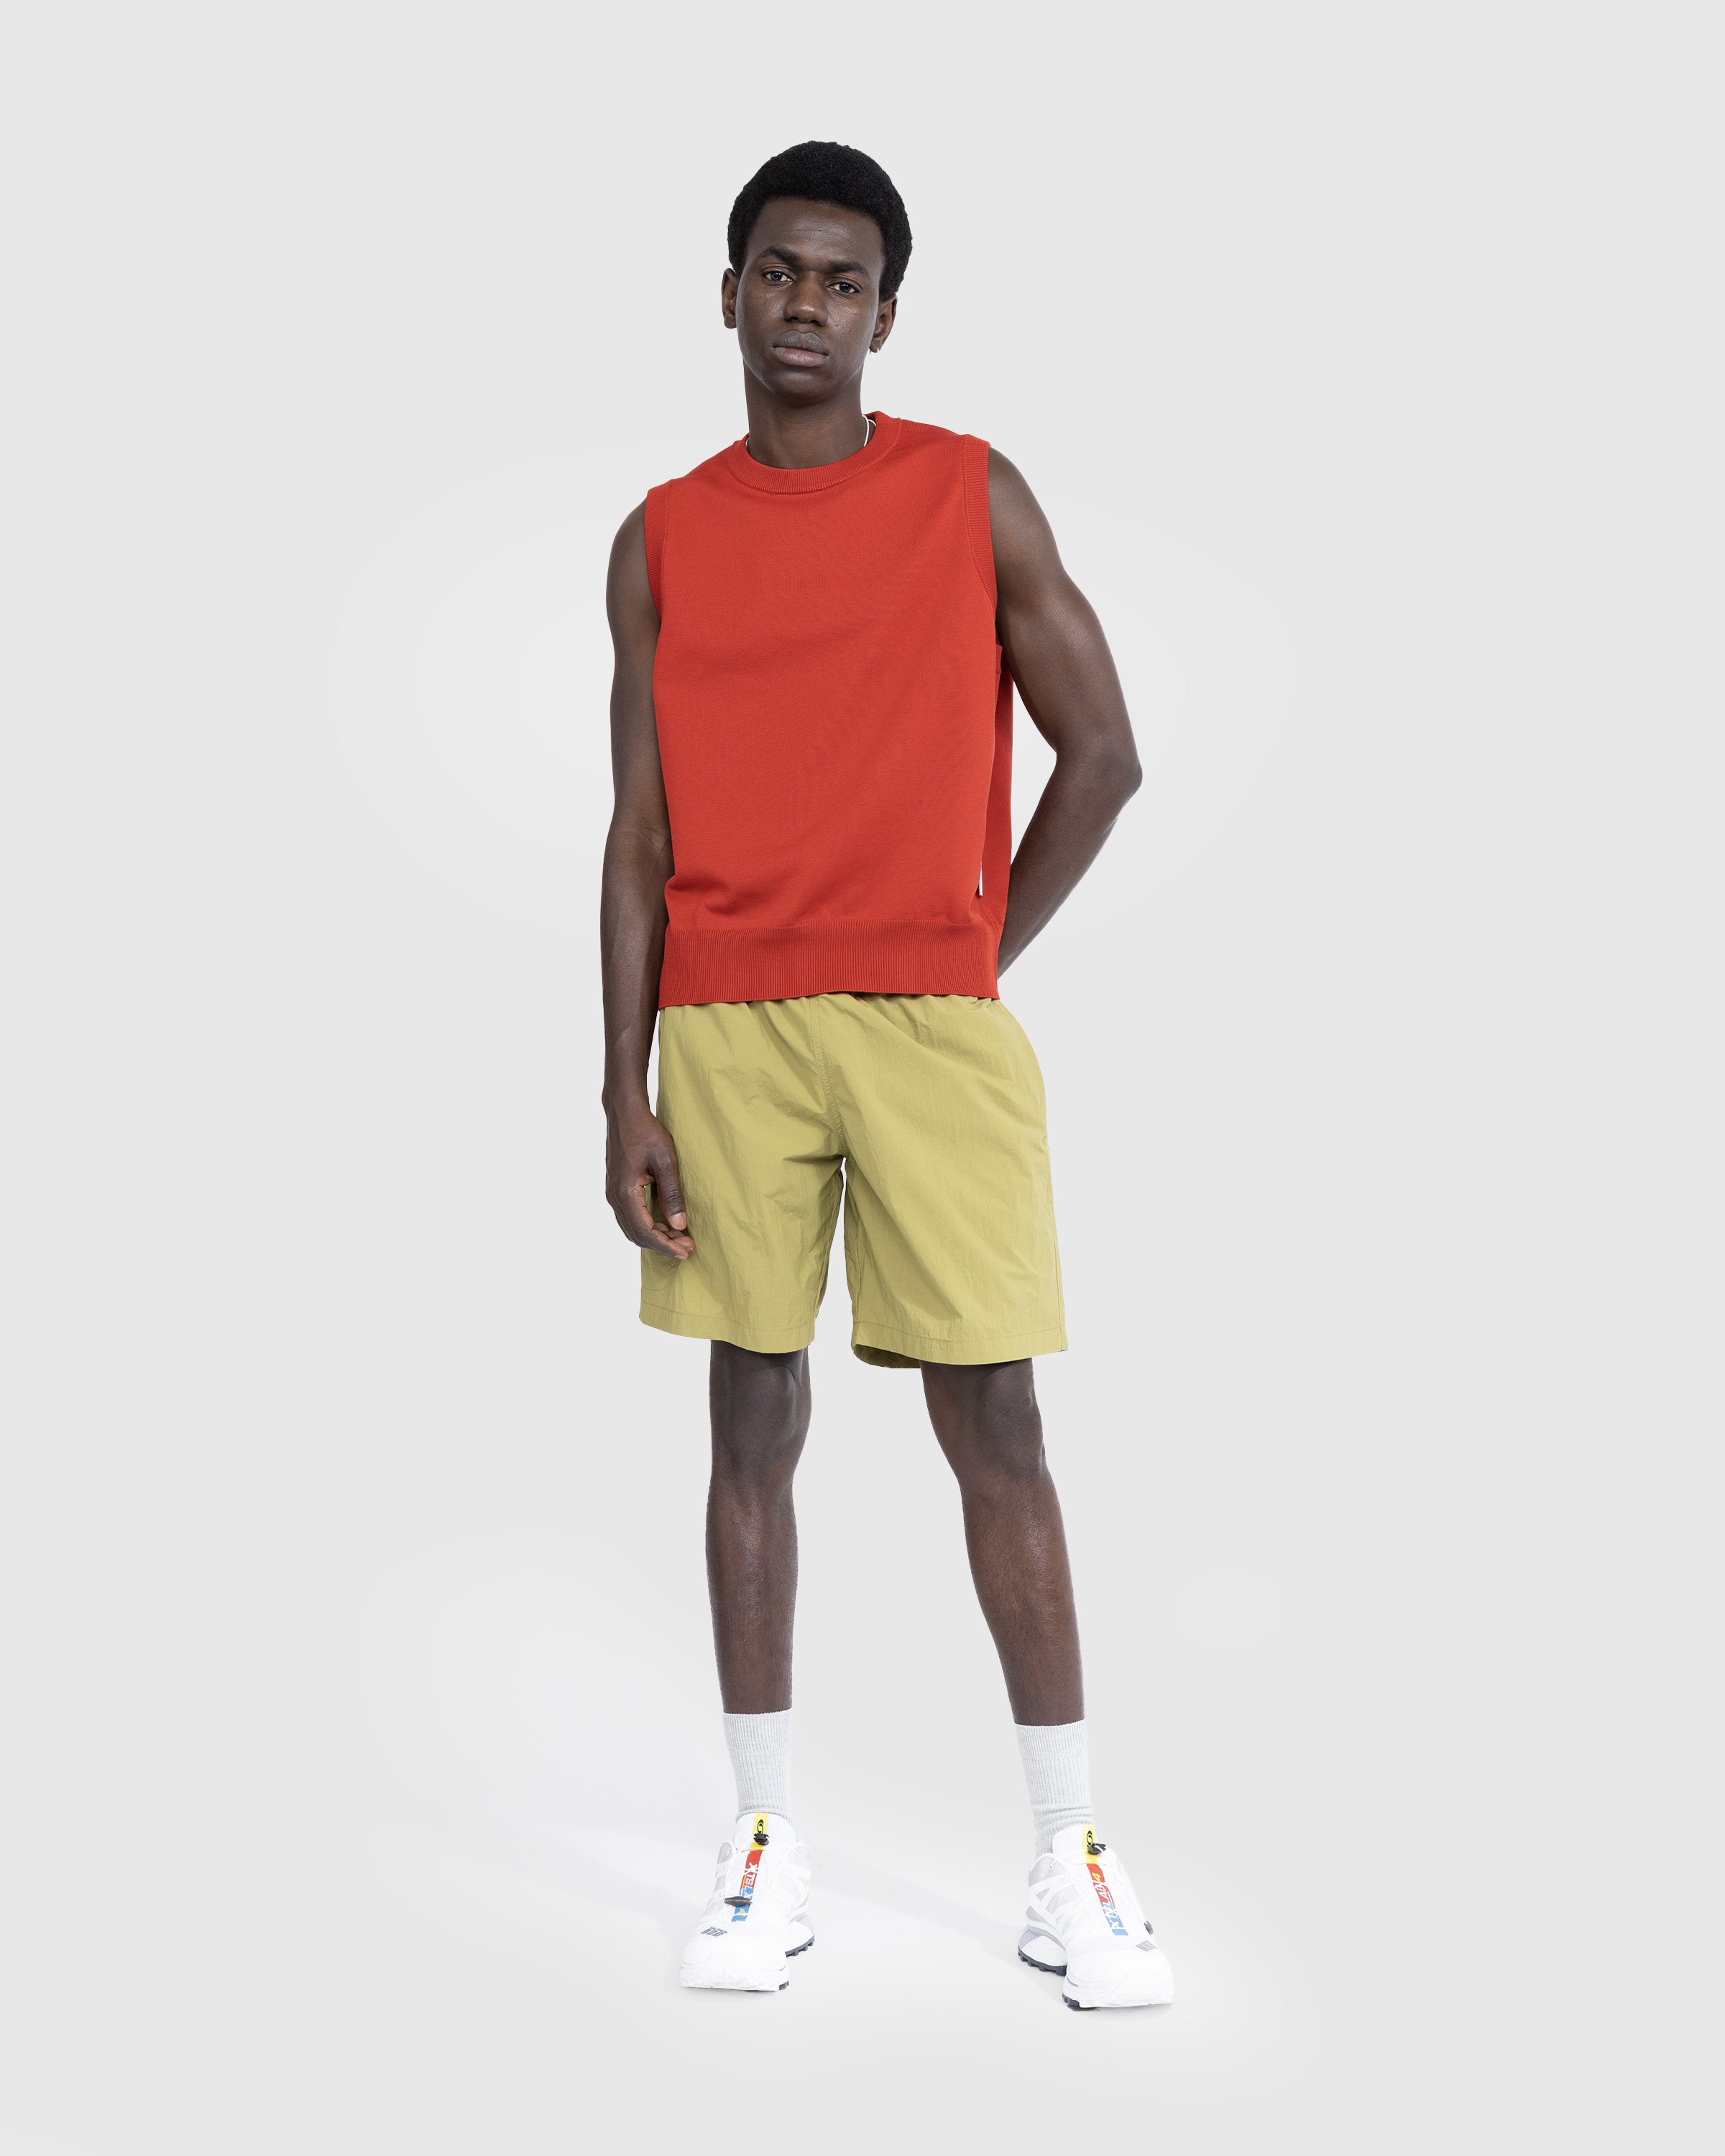 Highsnobiety HS05 - Poly Knit Tank Top Ruby Red - Clothing - Ruby Red - Image 5